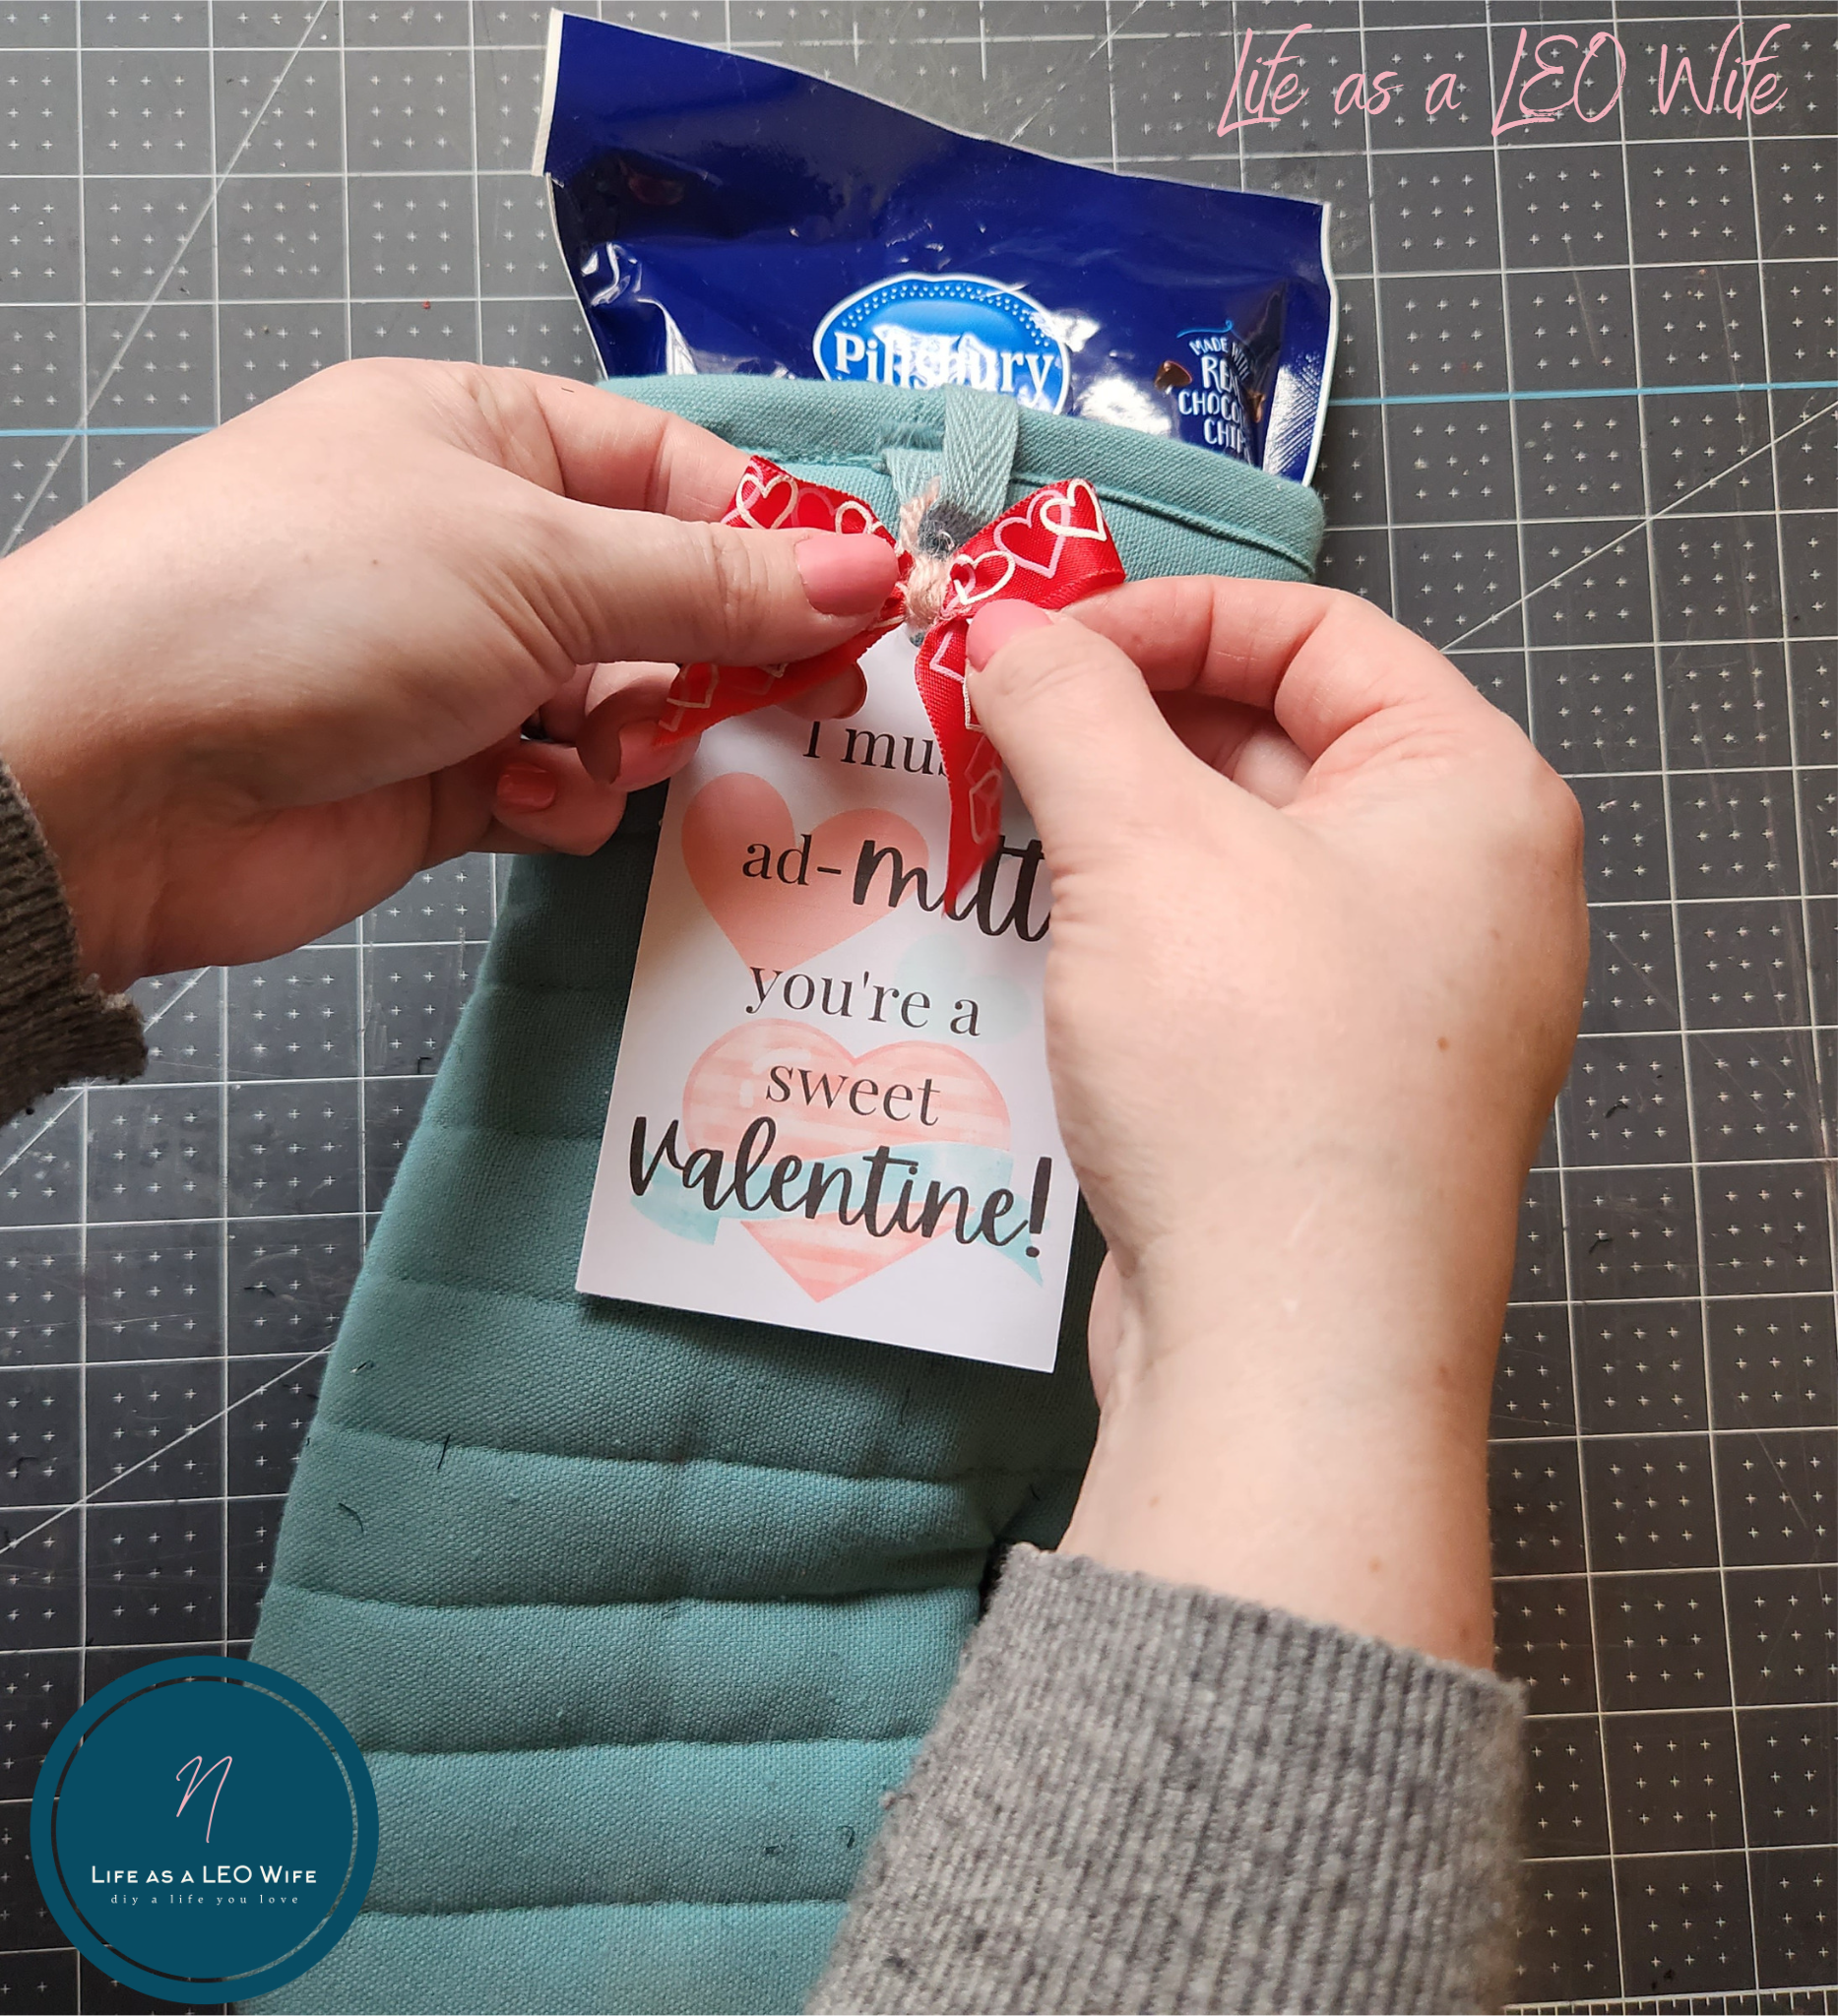 Placing the red bow with hot glue onto the Valentine's teachers gift tag.